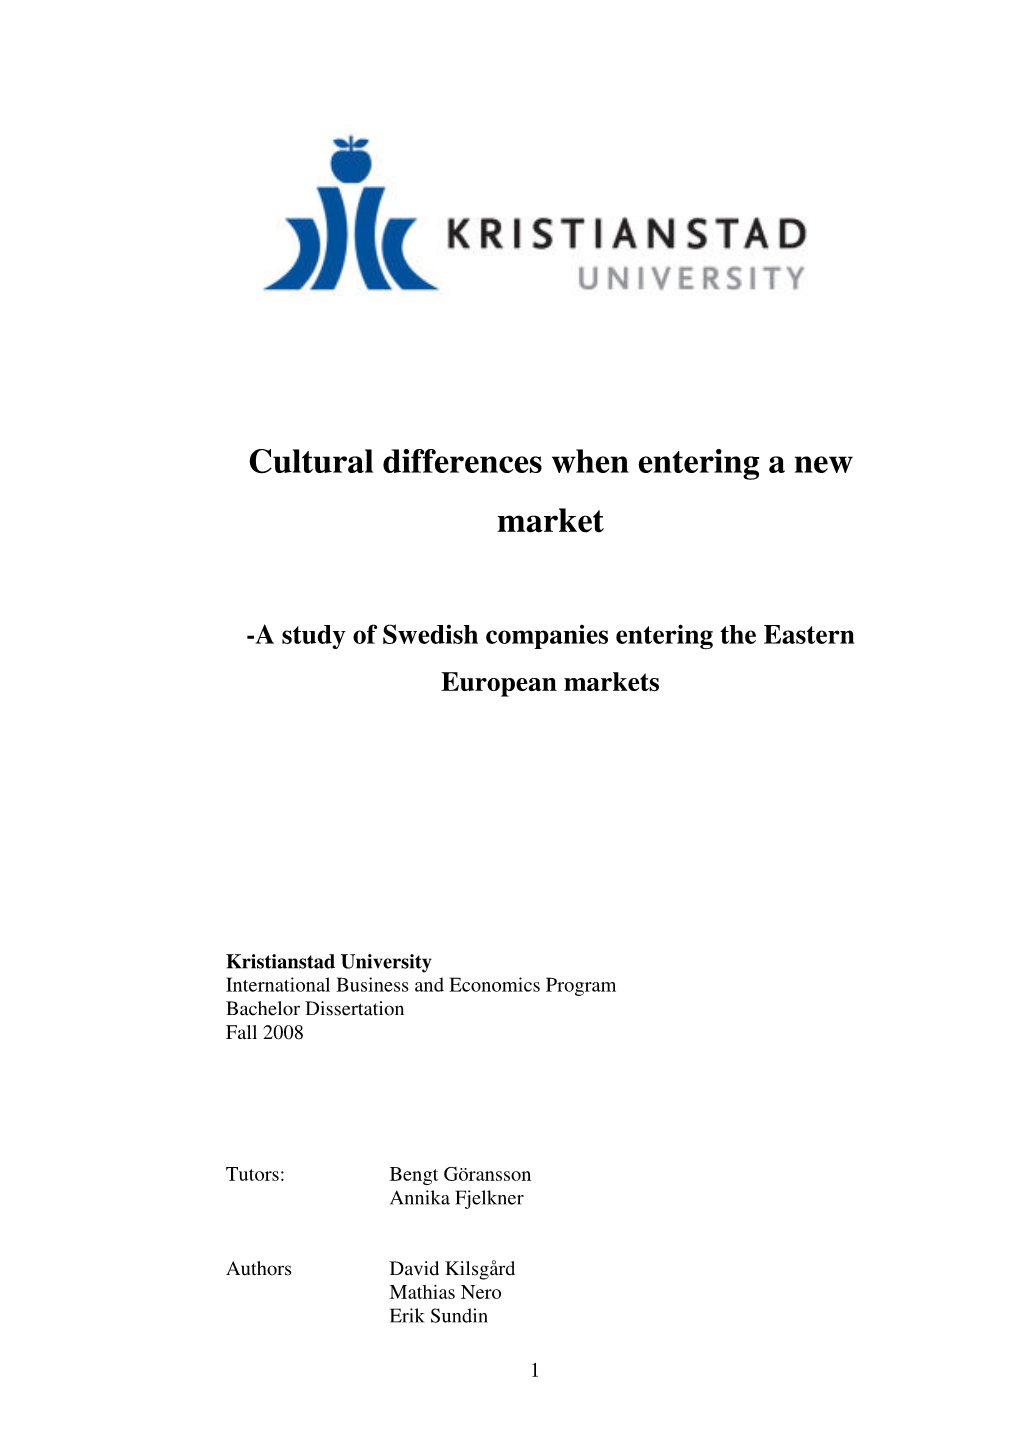 Cultural Differences When Entering a New Market